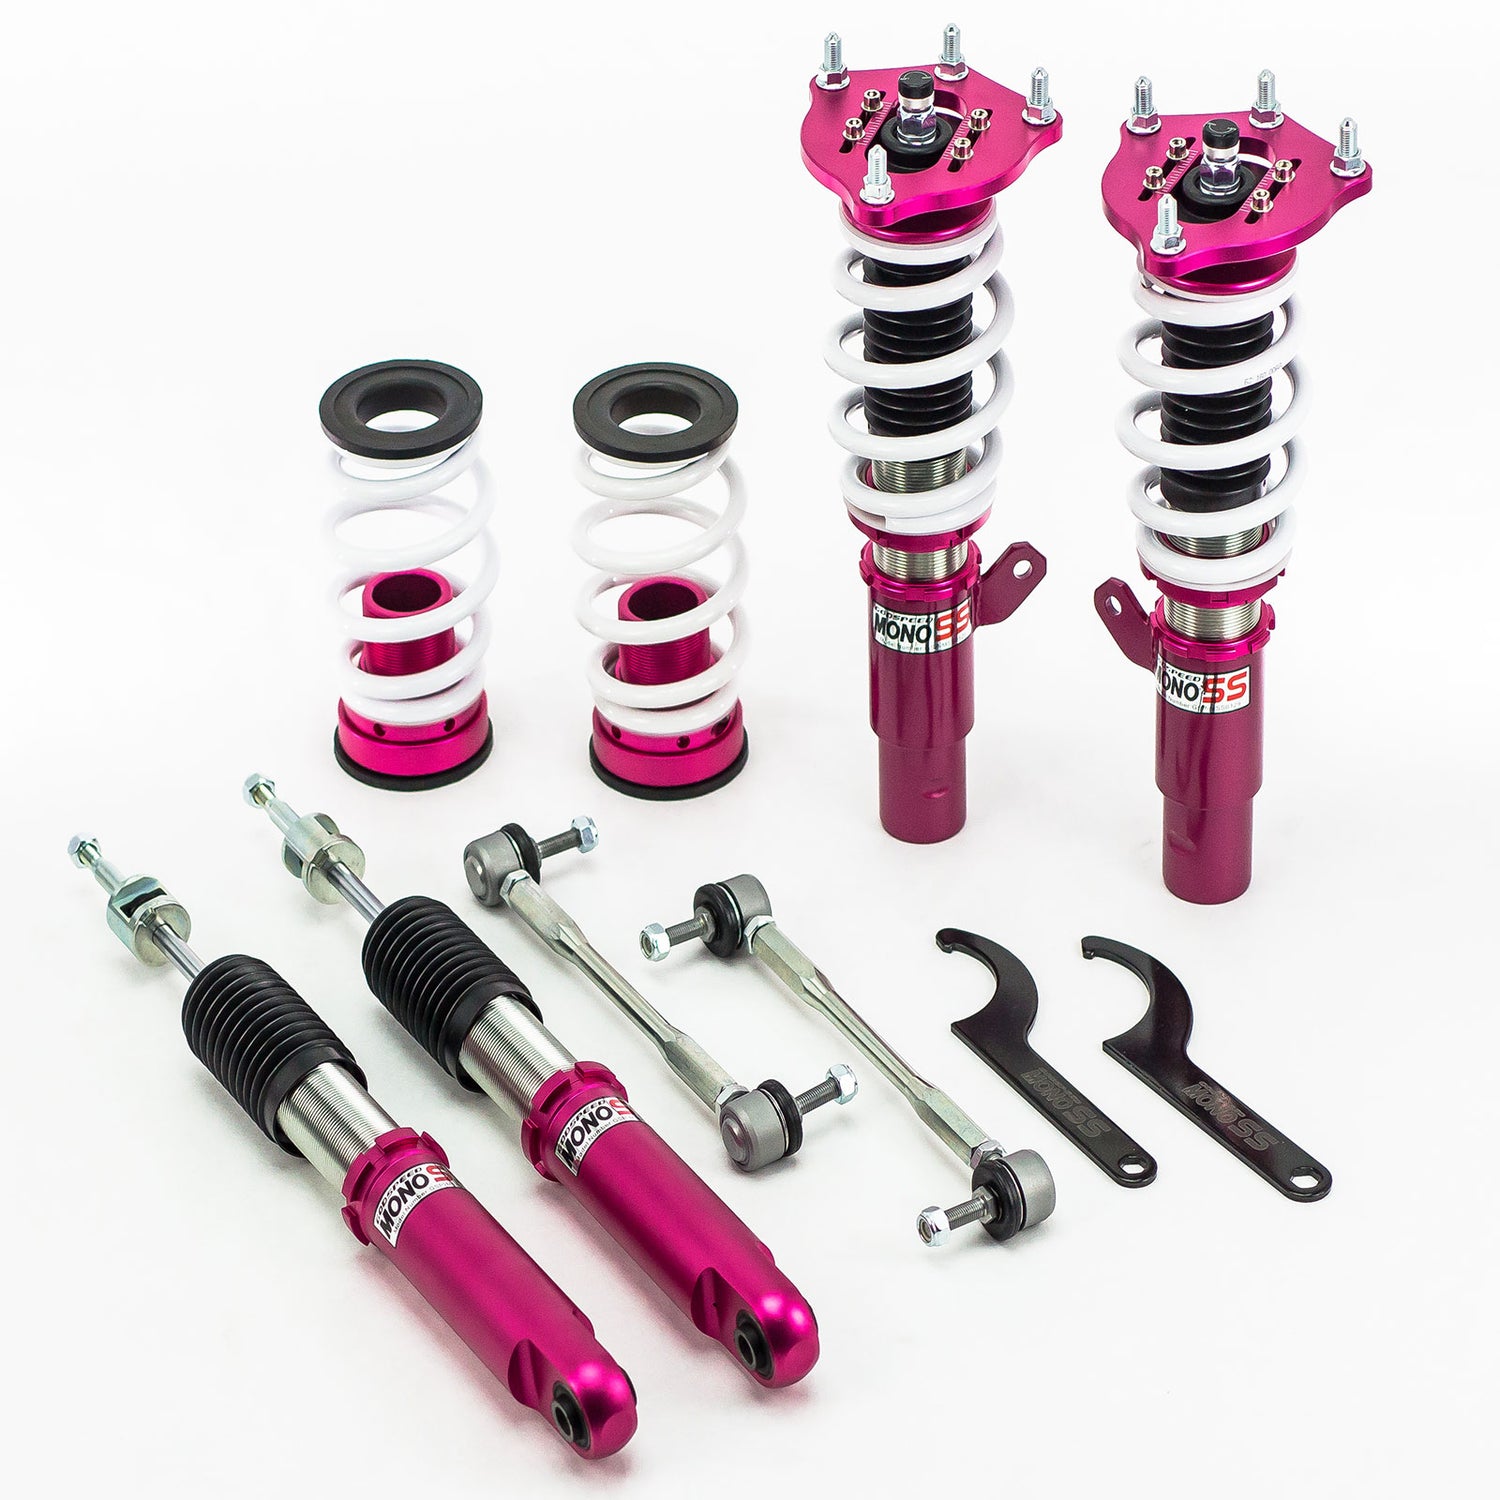 Godspeed MSS0129-52 MonoSS Coilover Lowering Kit, Fully Adjustable, Ride Height, Spring Tension And 16 Click Damping, Honda Civic(FC) Sport/Touring 2016+UP